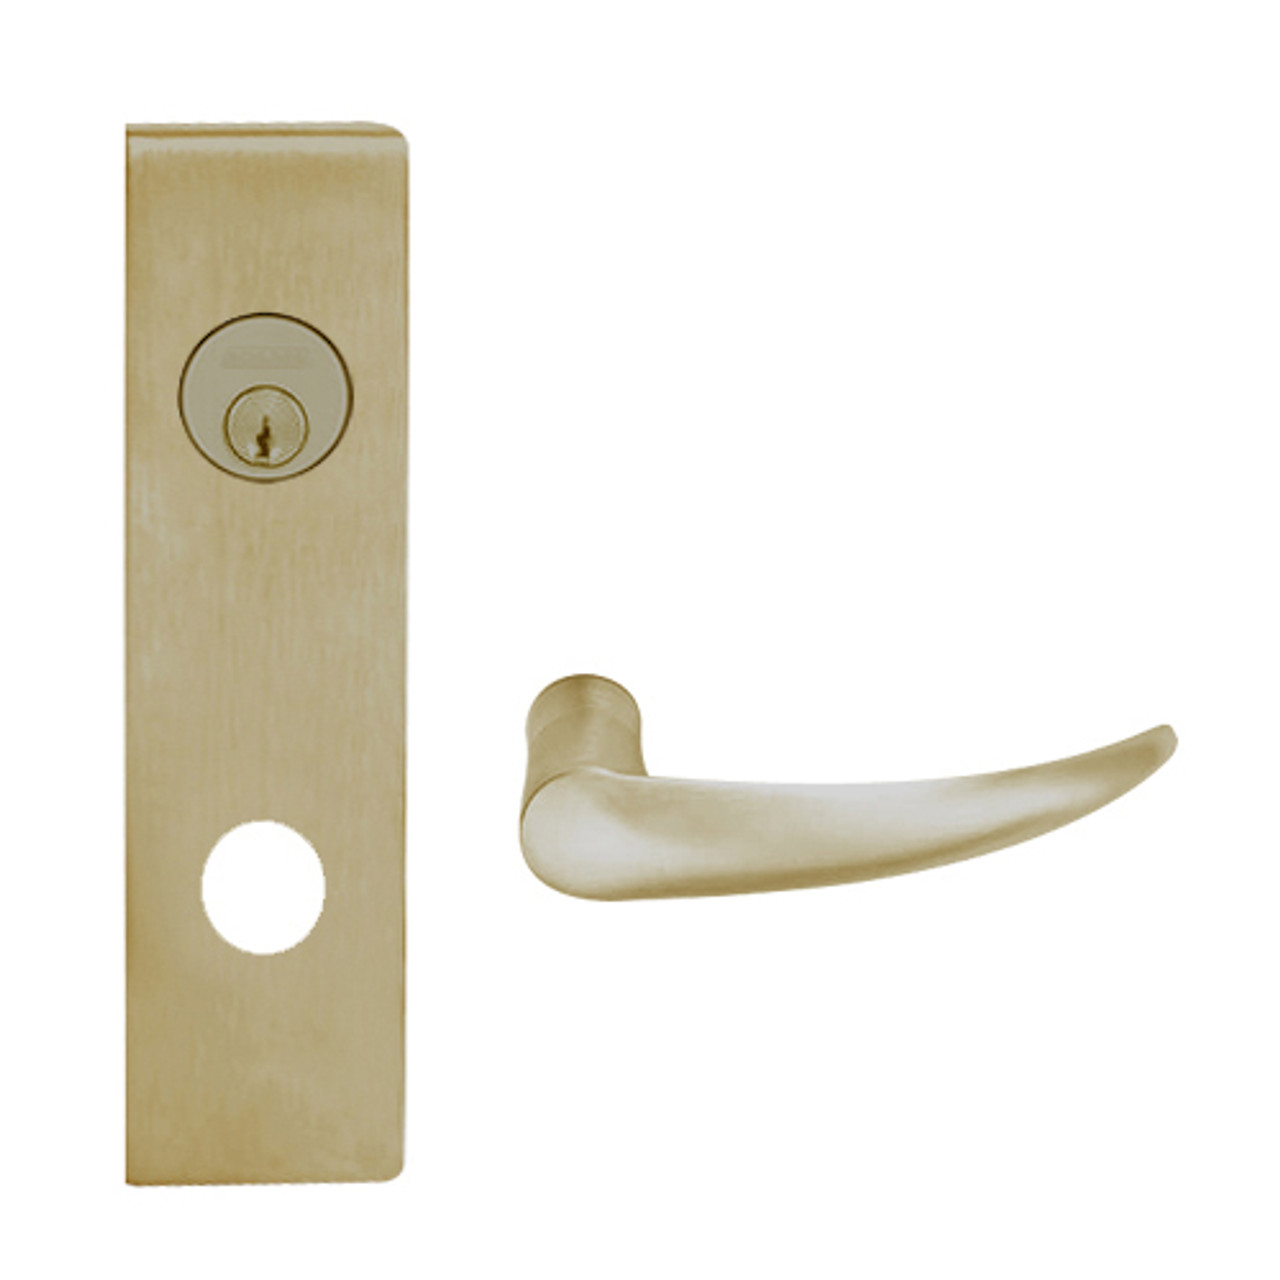 L9026P-OME-N-619 Schlage L Series Exit Lock with Cylinder Commercial Mortise Lock with Omega Lever Design in Satin Nickel